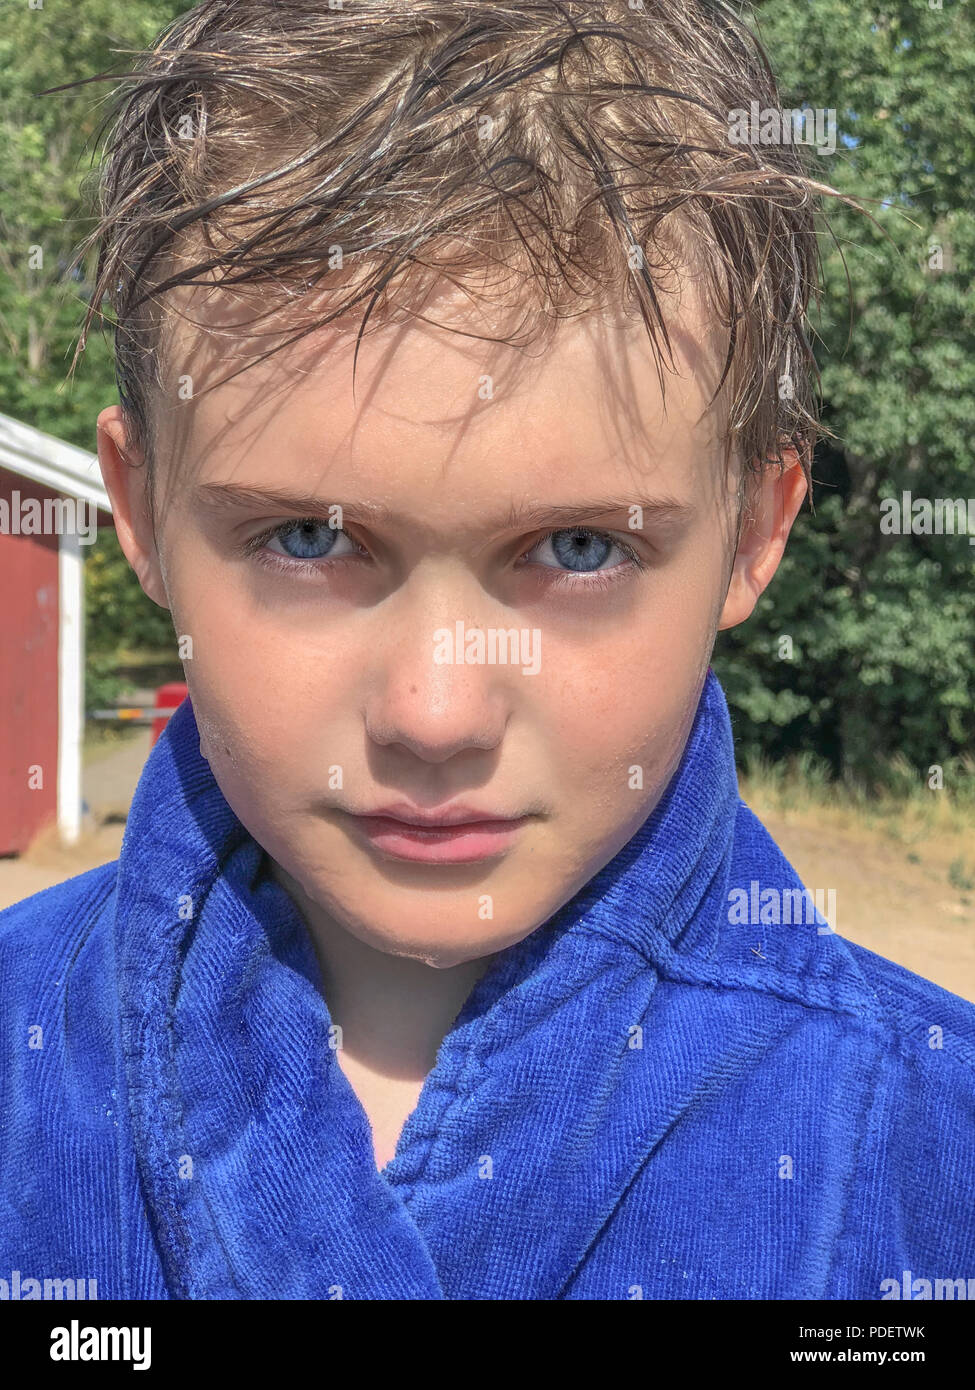 Handsome young caucasian boy with beautiful blue eyes looking at camera with neutral determined confident expression Stock Photo